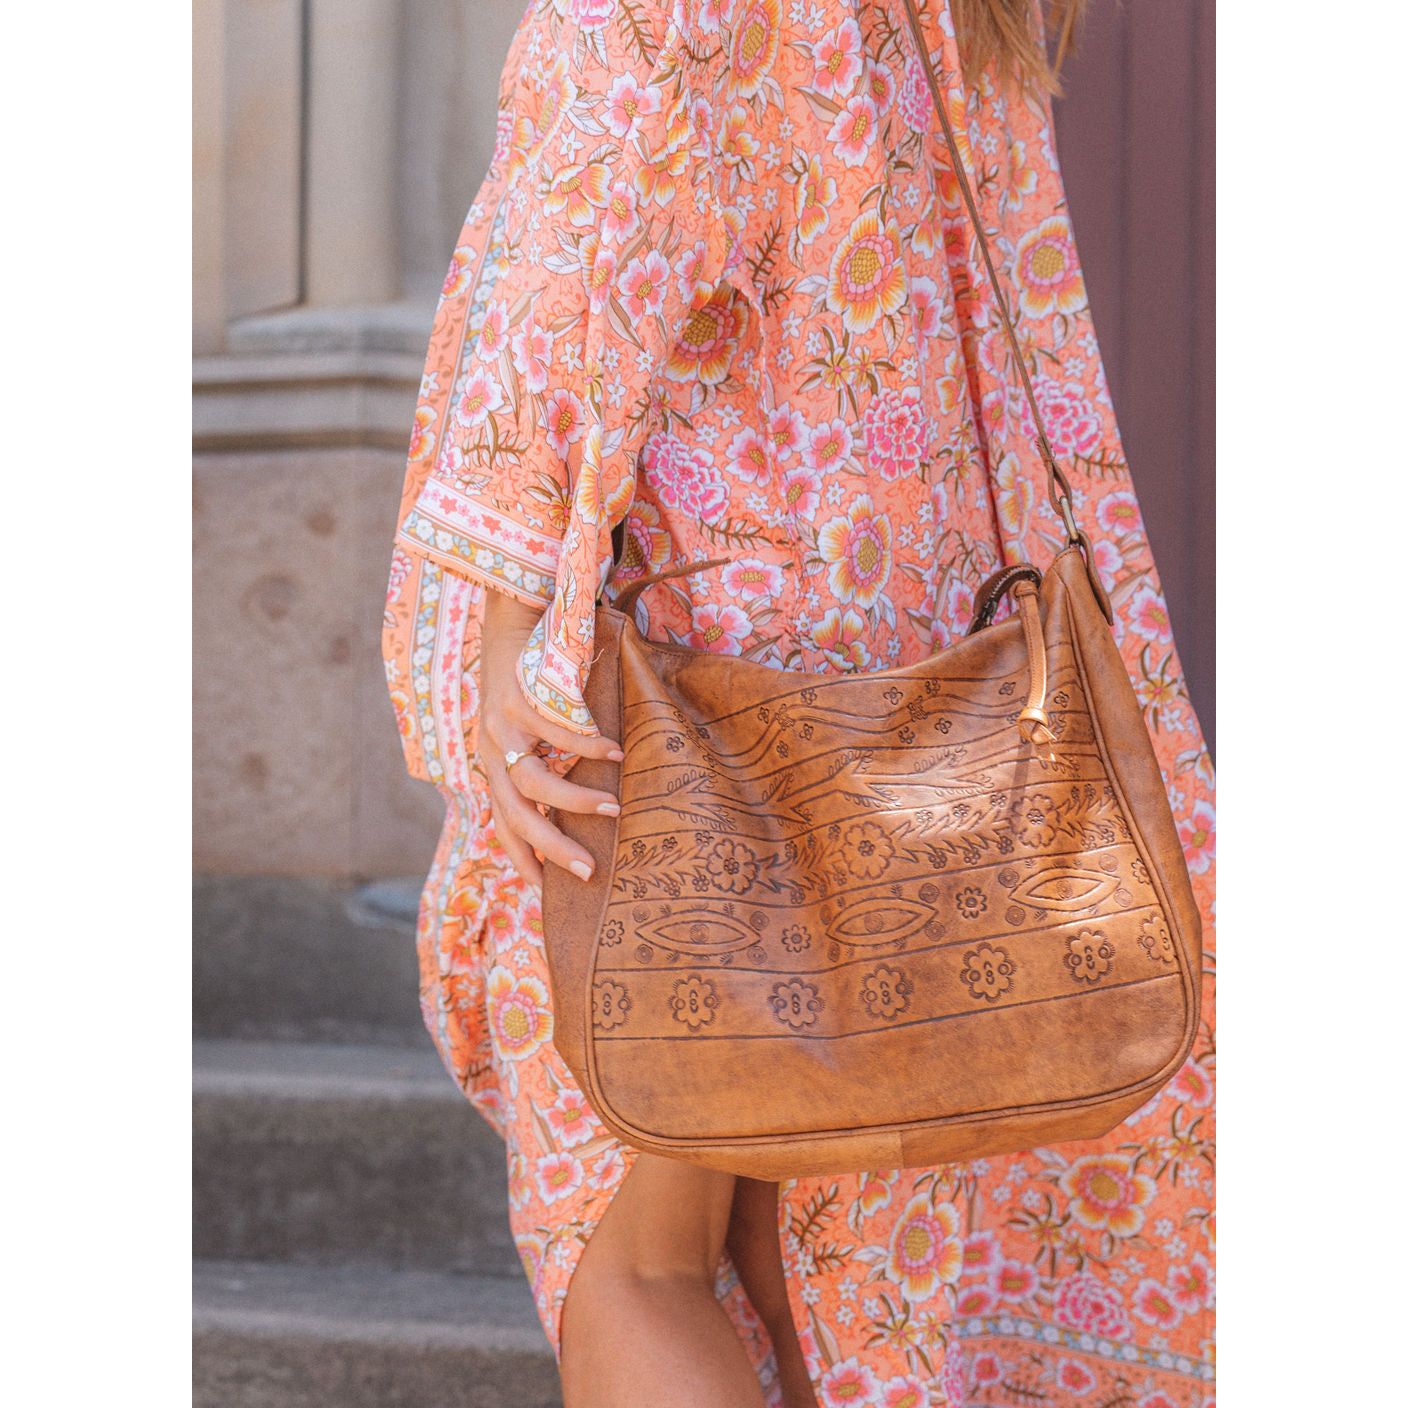 Wildflowers Rustic Slouch Bag SALE $189 now $100